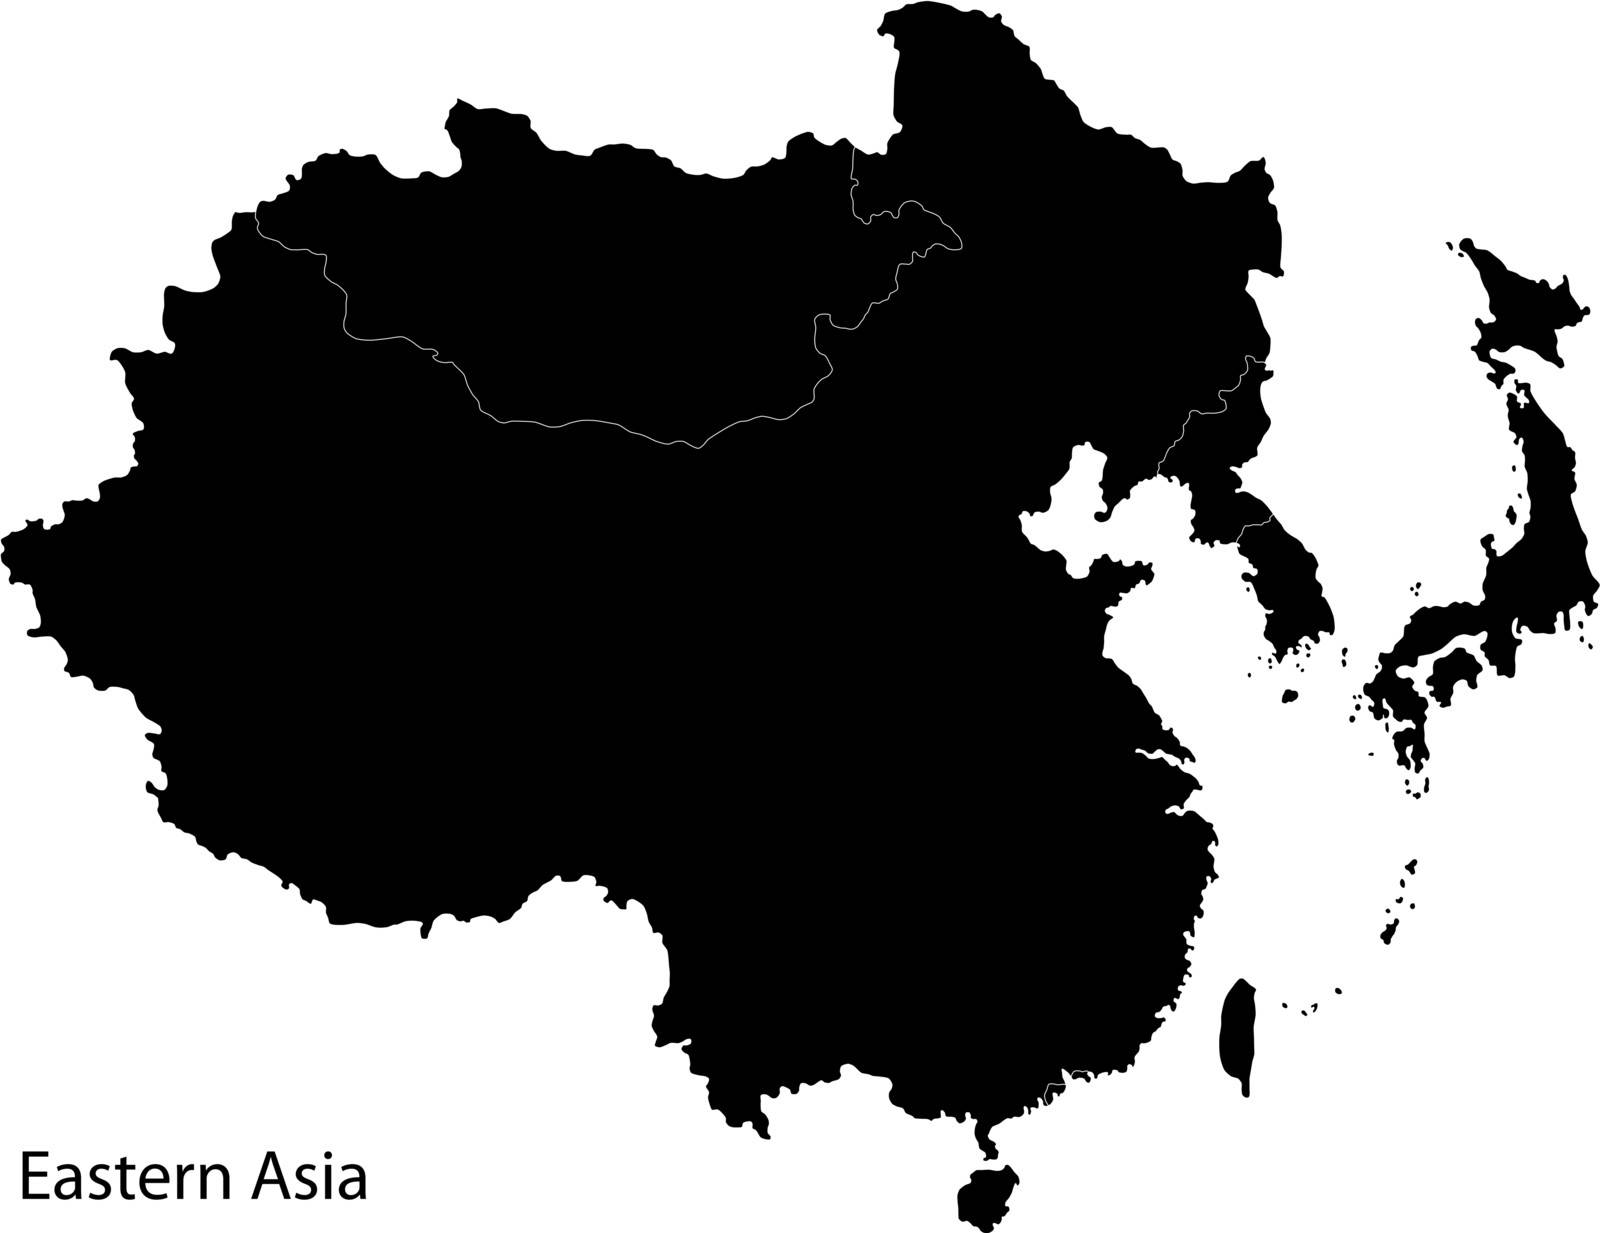 Black map of Eastern Asia divided by the countries